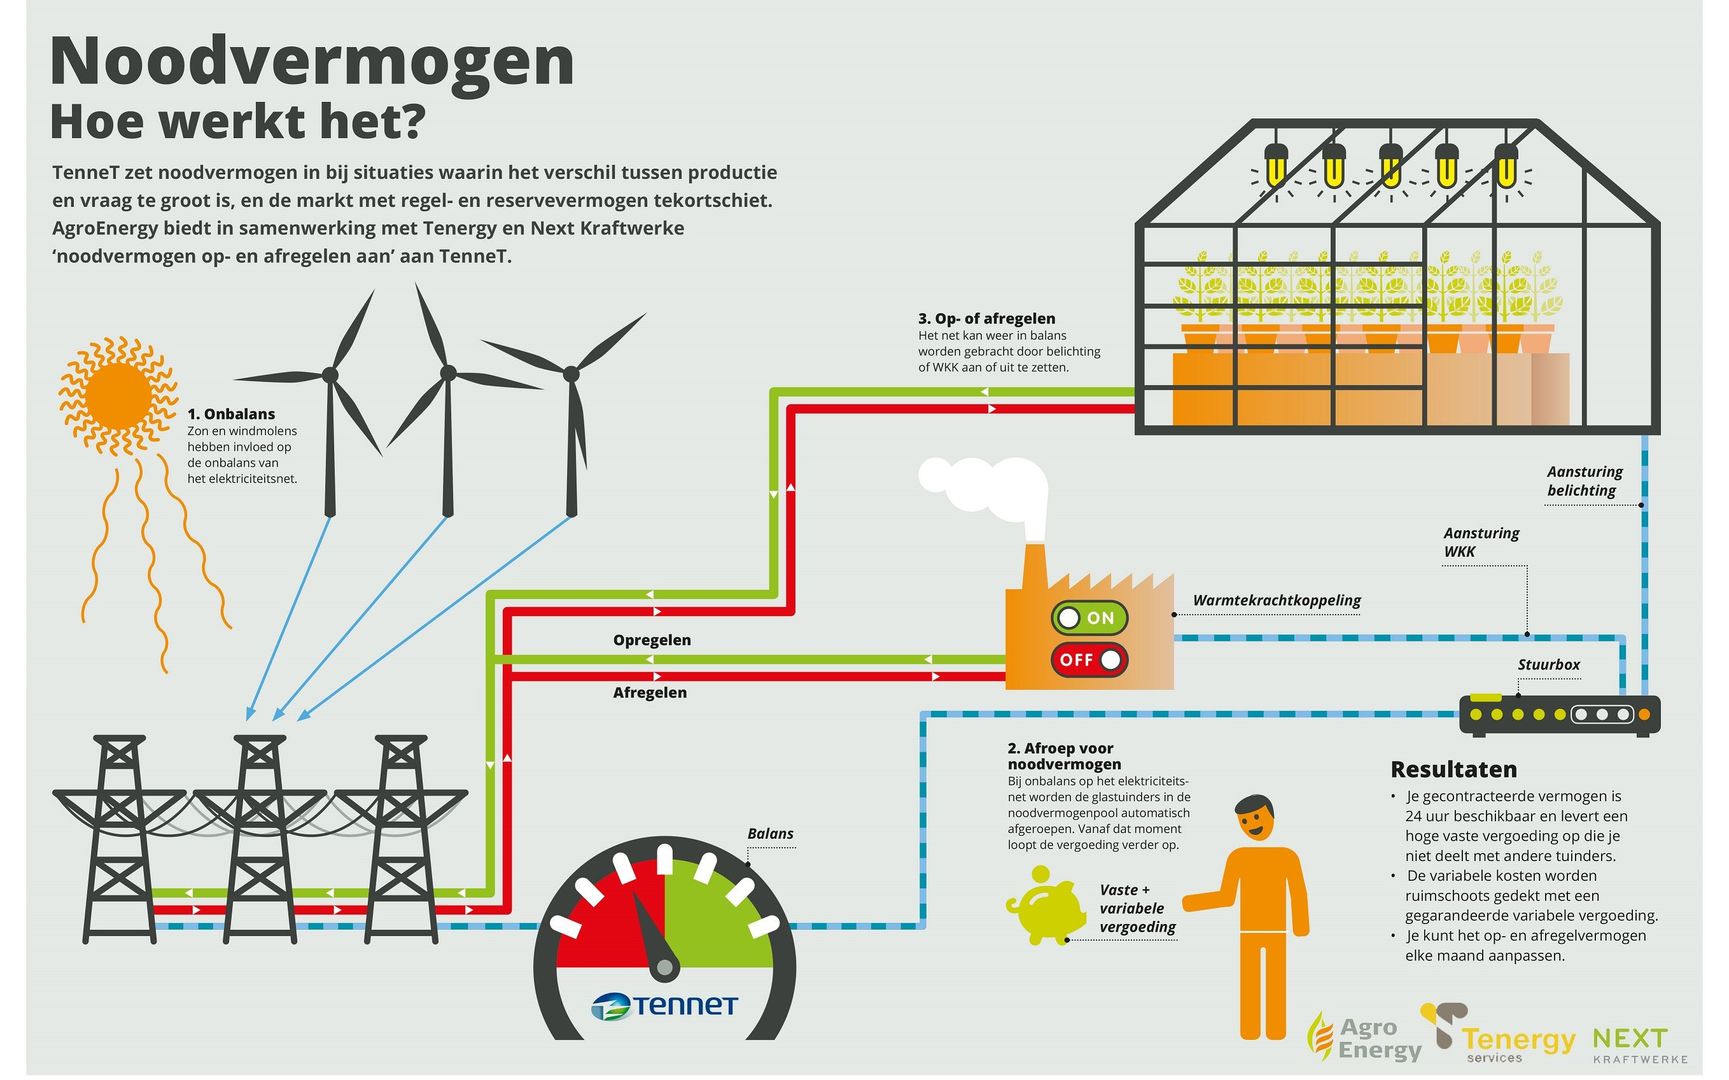 Process of providing the noodvermogen control reserve in the Netherlands.